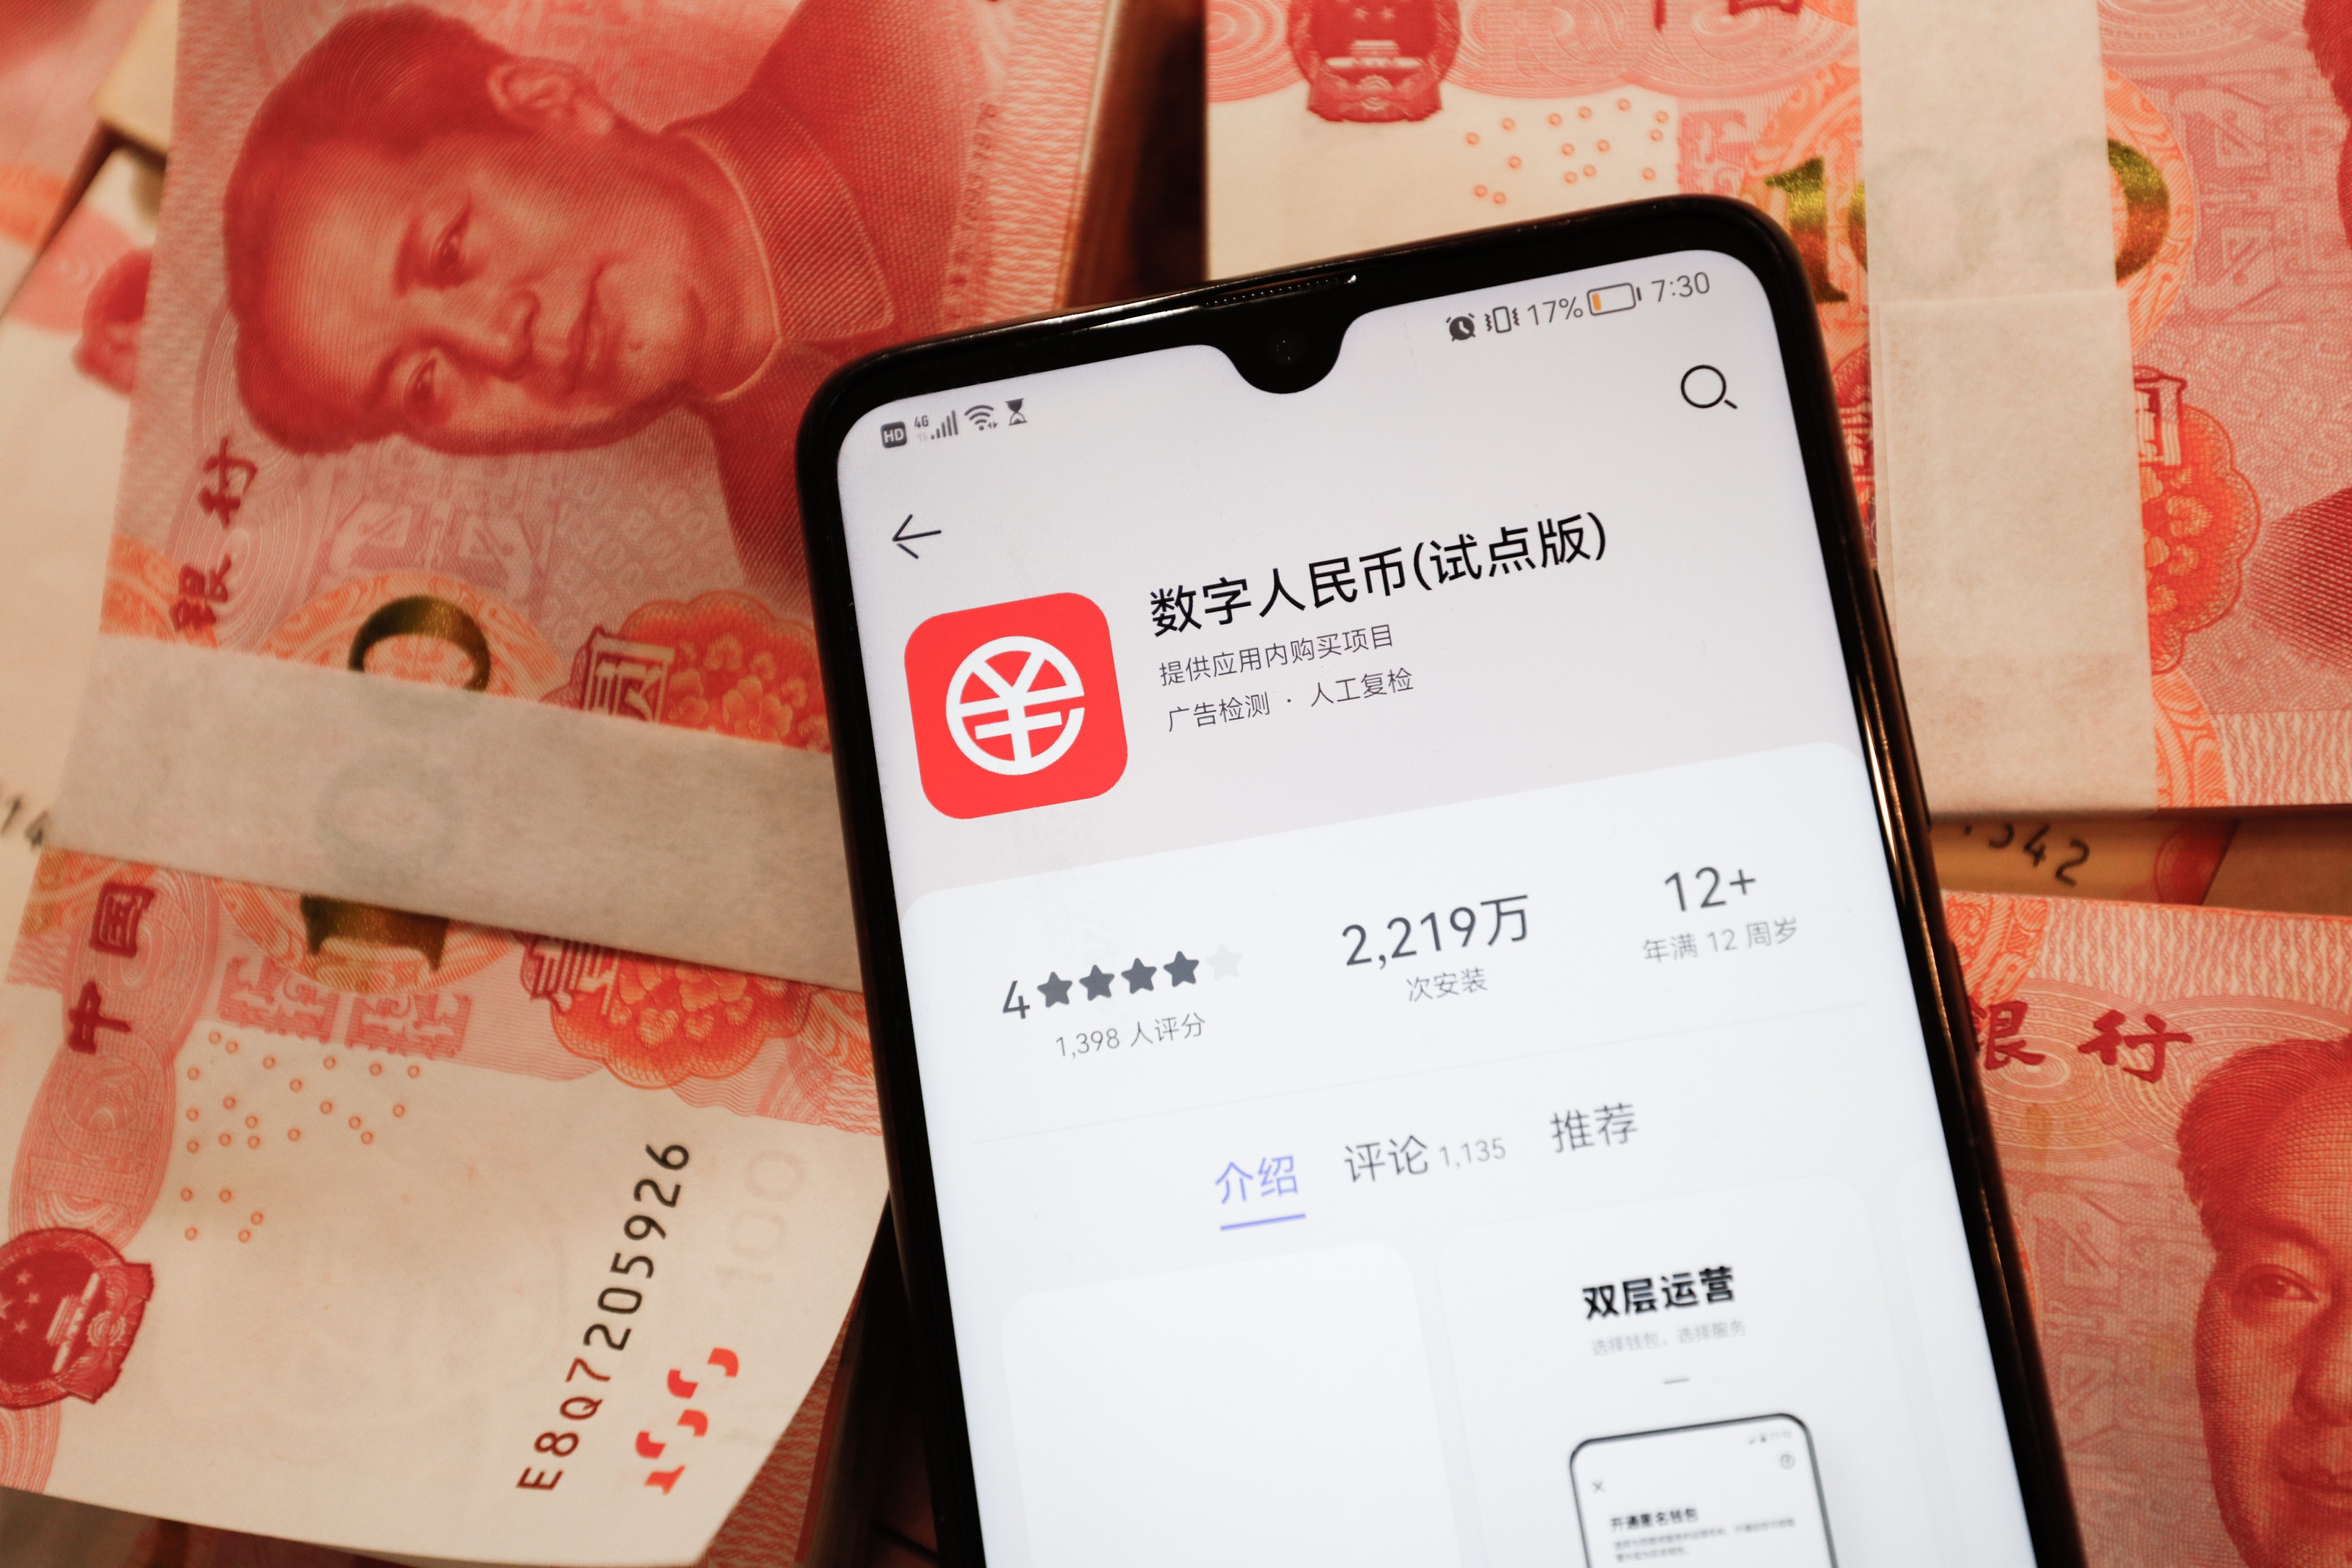 The digital yuan is seen as one way China could further internationalise its currency while also maintaining capital controls at home. Photo: Shutterstock